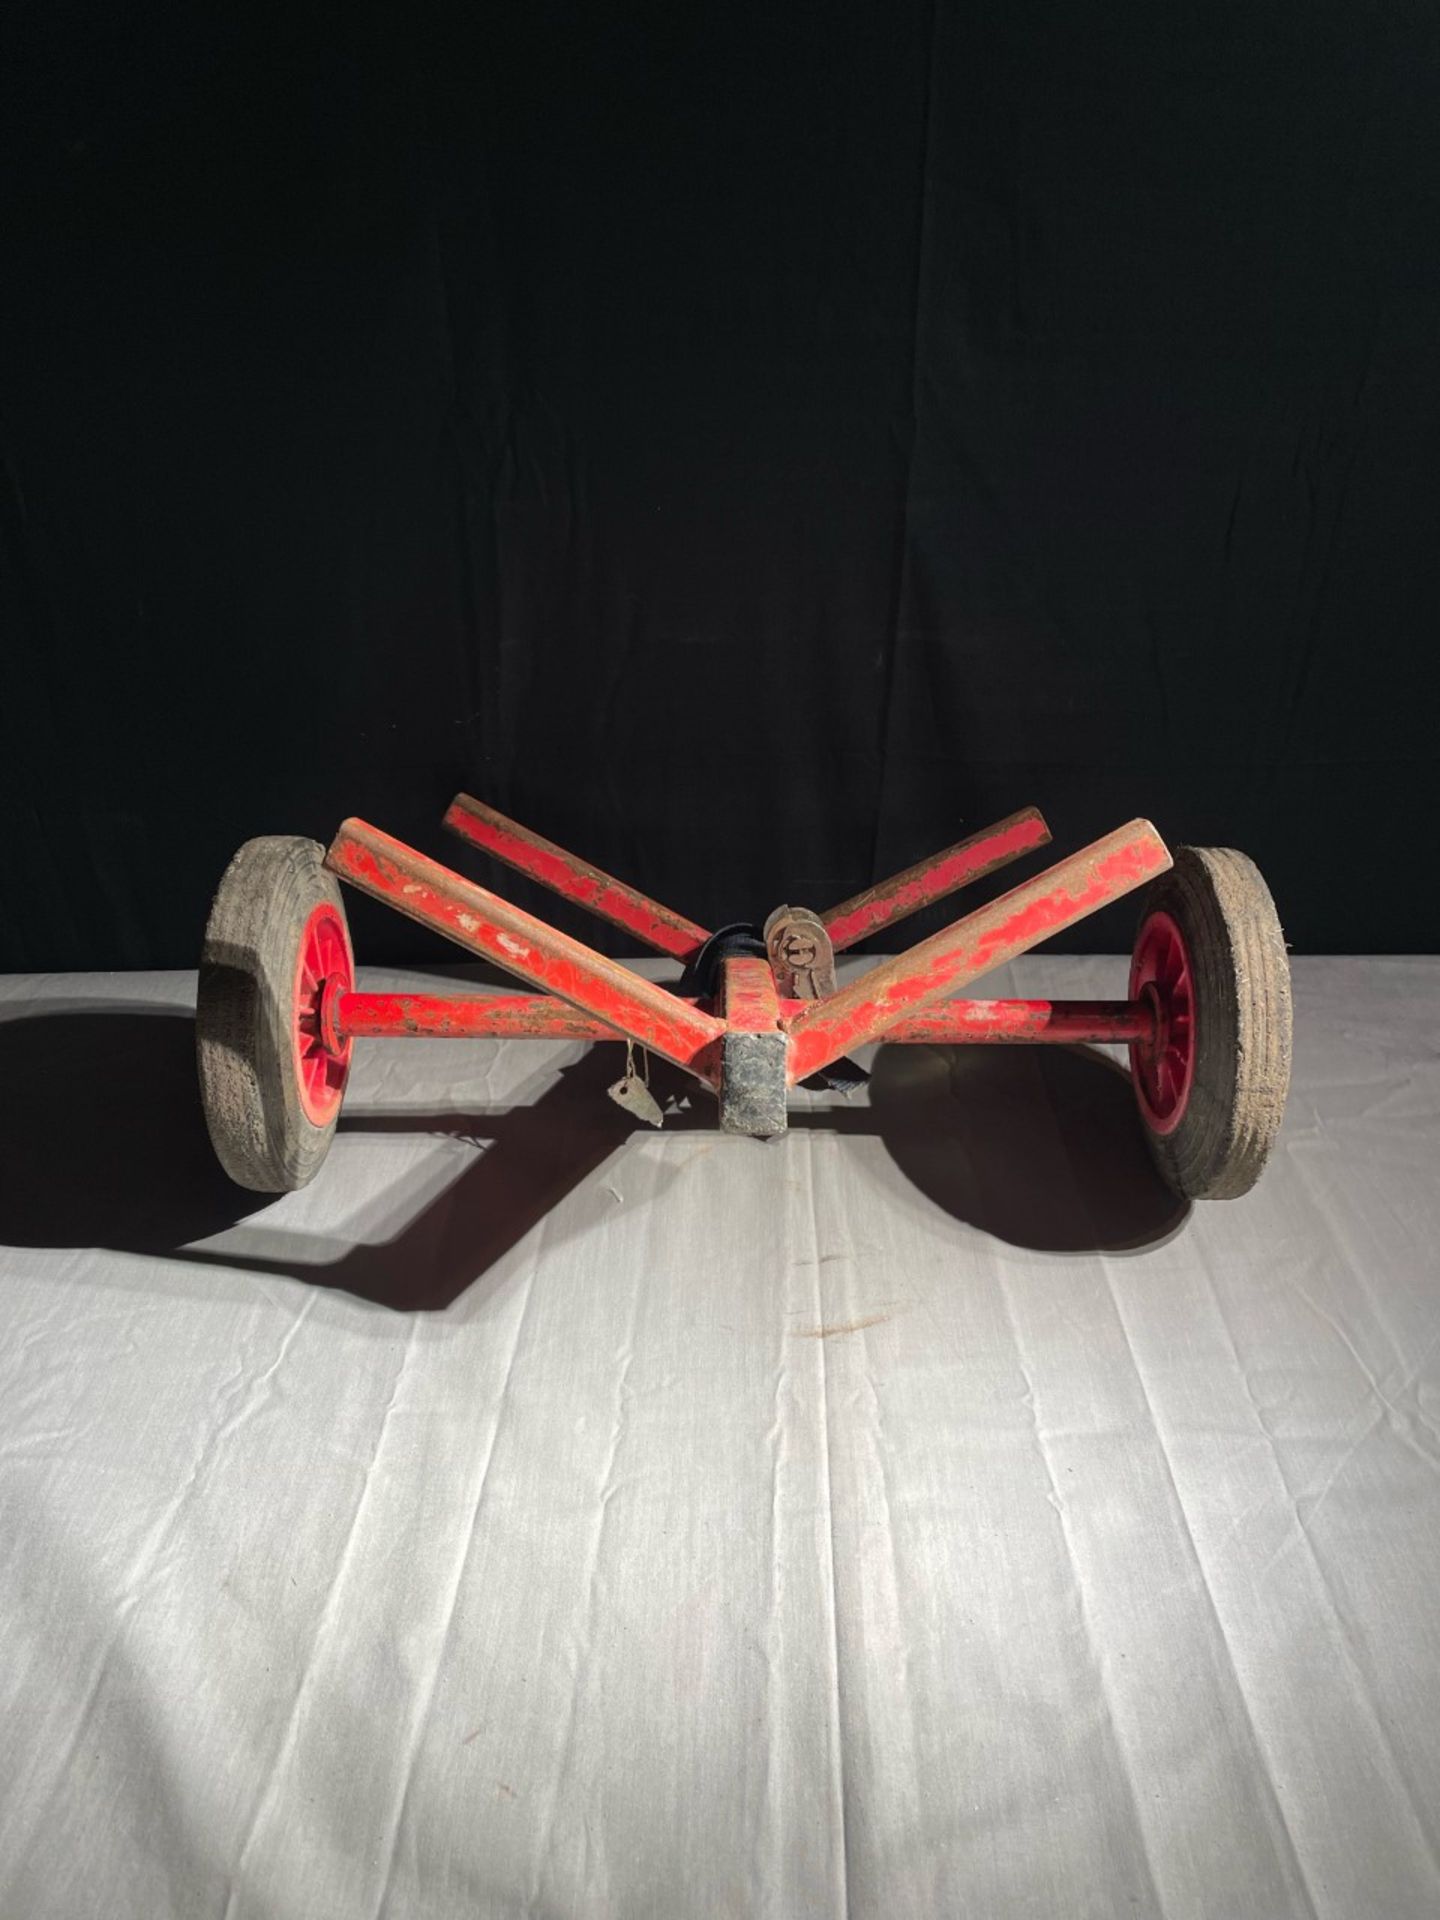 2 wheeled v shaped frame dolly. Good for moving stuff about - Image 2 of 2